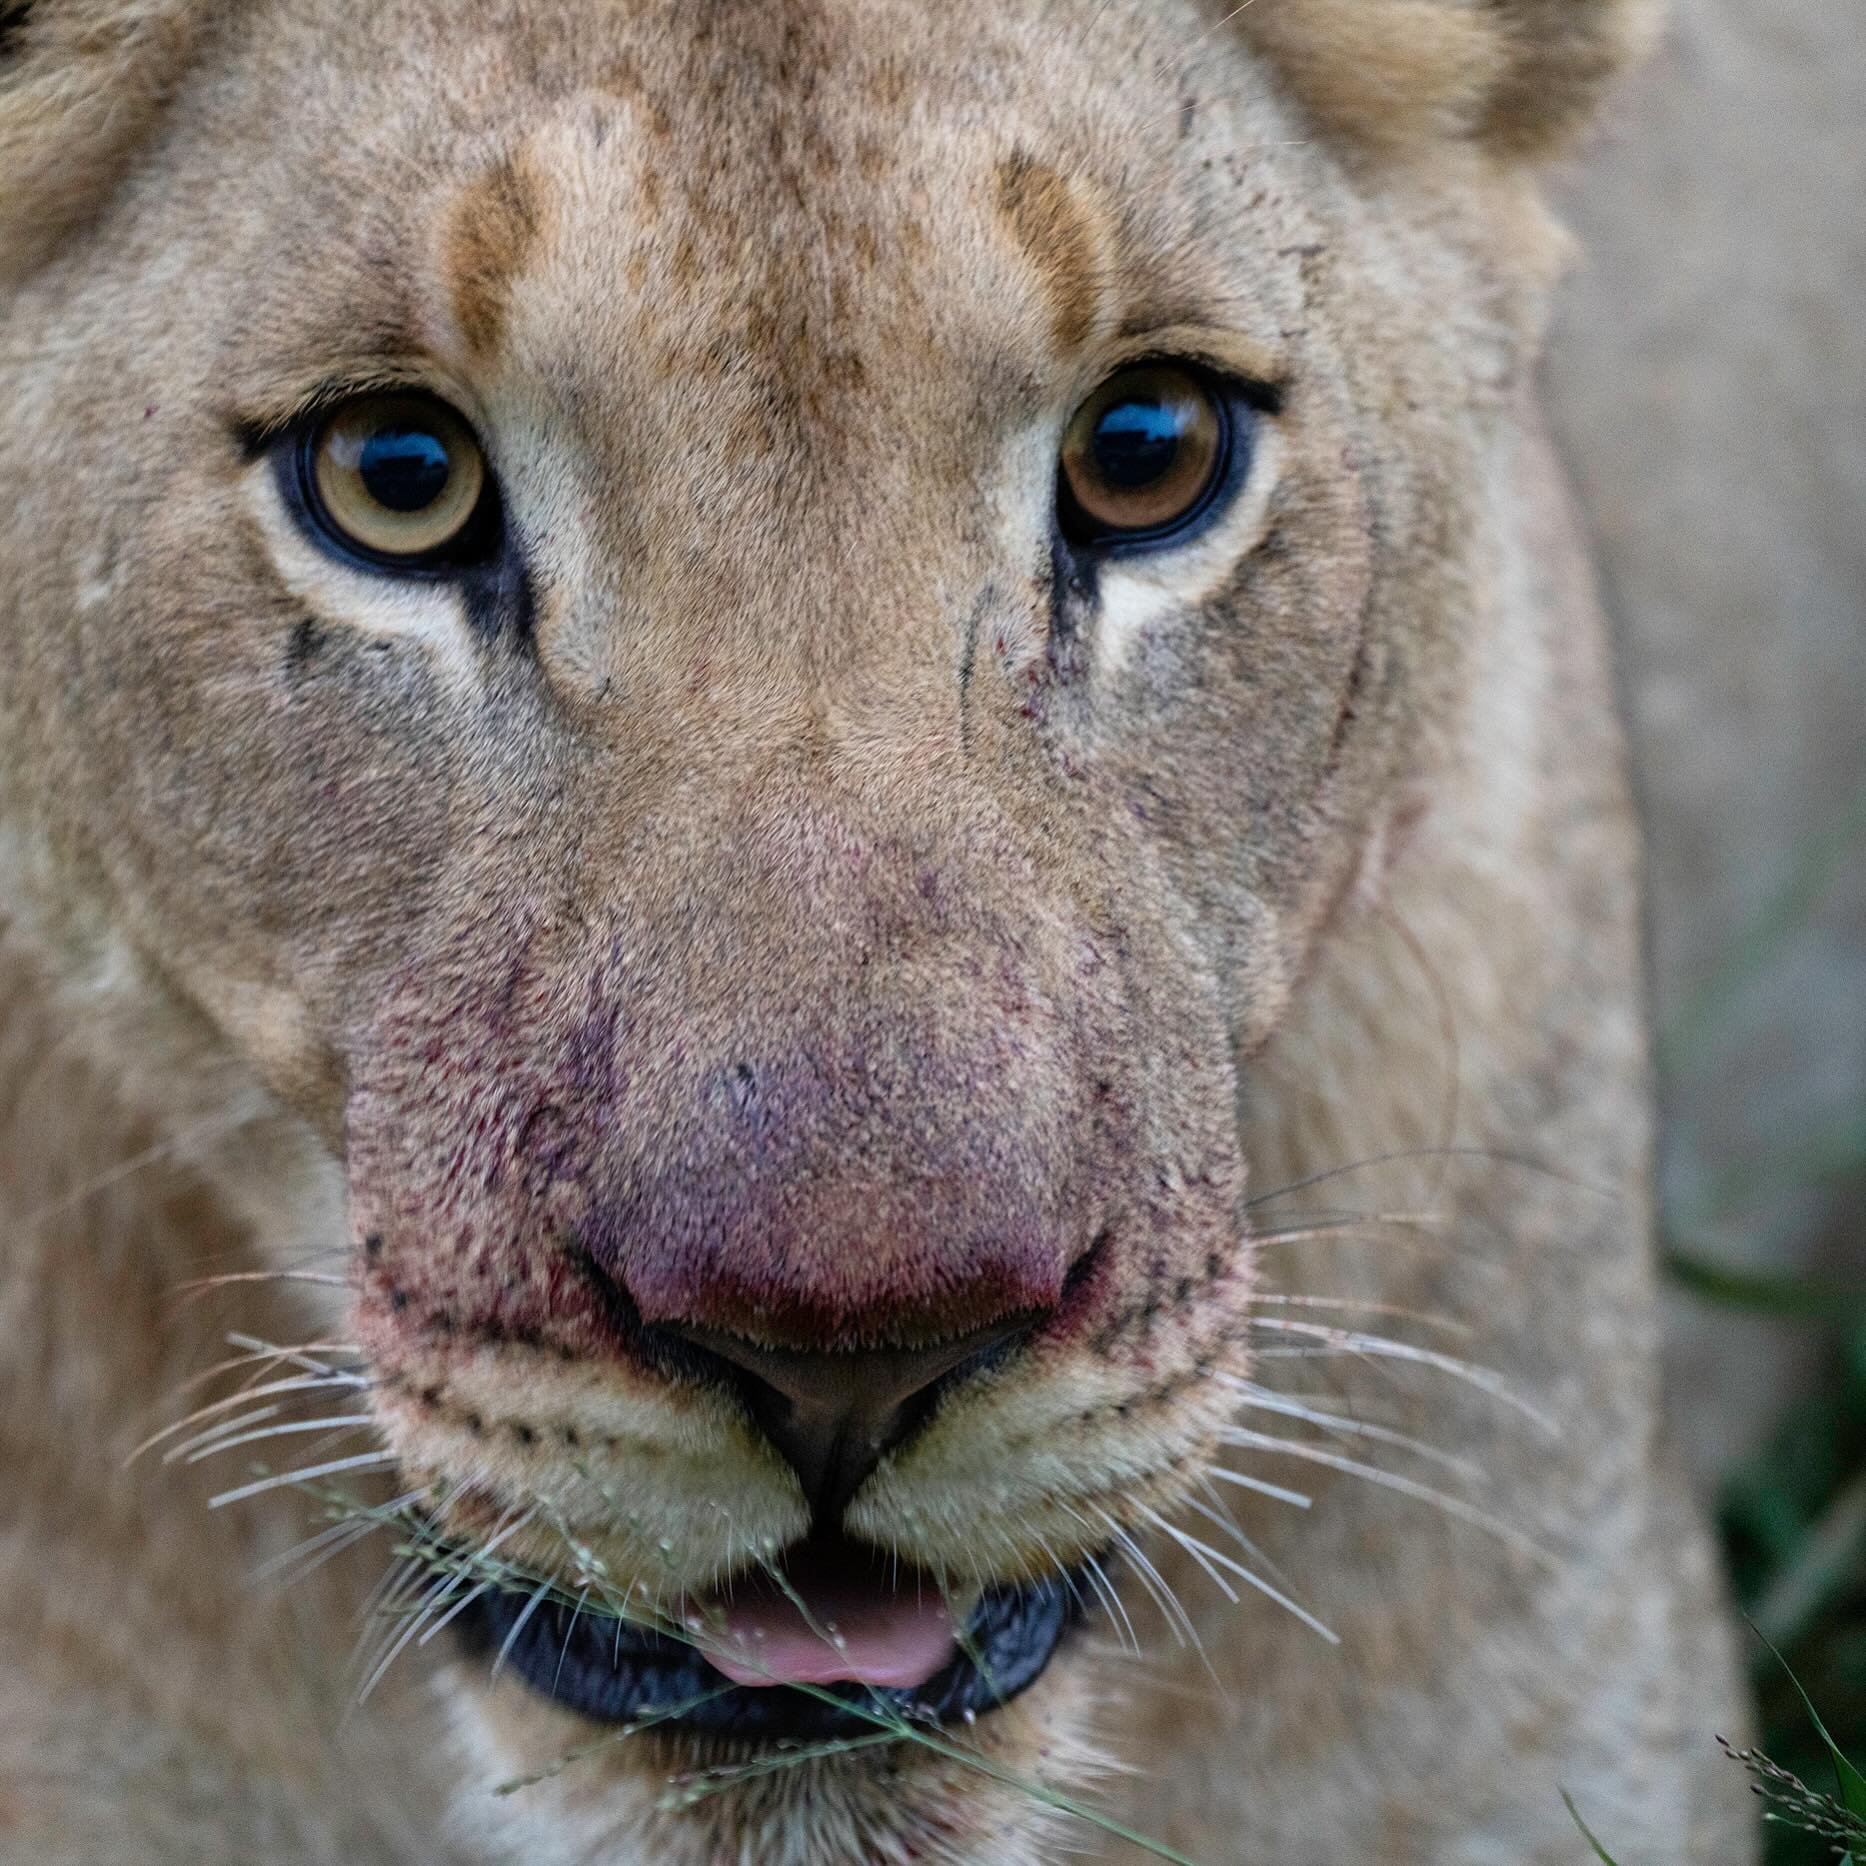 Beauty with the Eyes - this is the first dual color eyed lion I&rsquo;d seen. Her subadult son also shares her unique and beautiful eye coloration. I always think about earthly duality, and something I&rsquo;ve been rolling around with for months is 